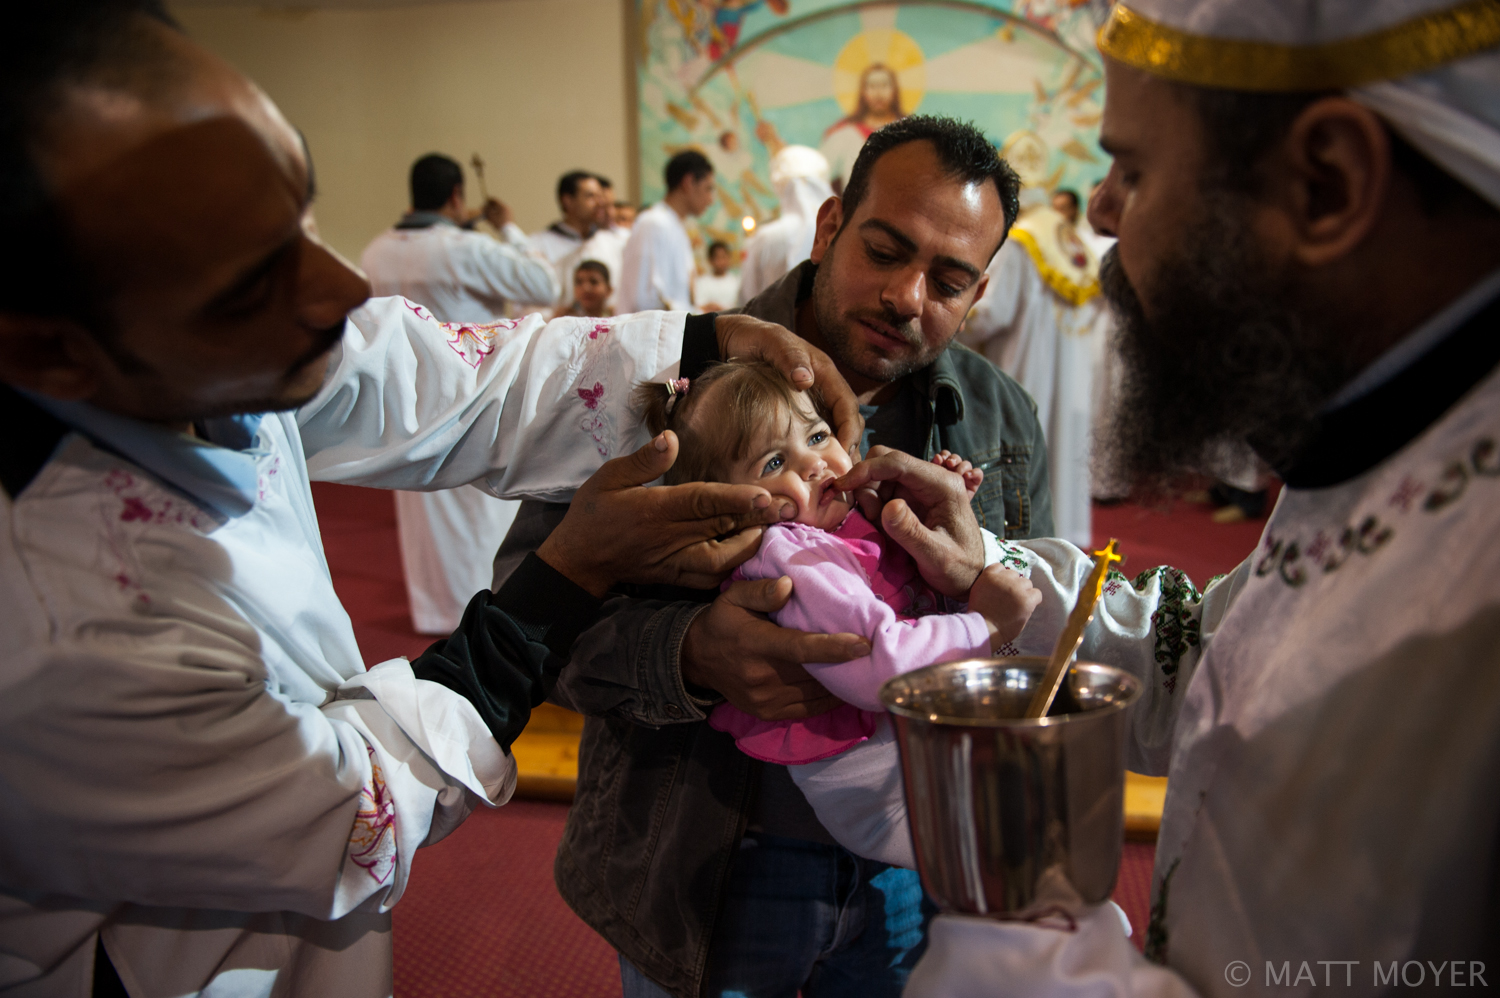  Coptic Christian Egyptians attend a Sunday morning church service in Cairo, Egypt. The church is in the the Zebeleen or "trash people" area of Cairo. 